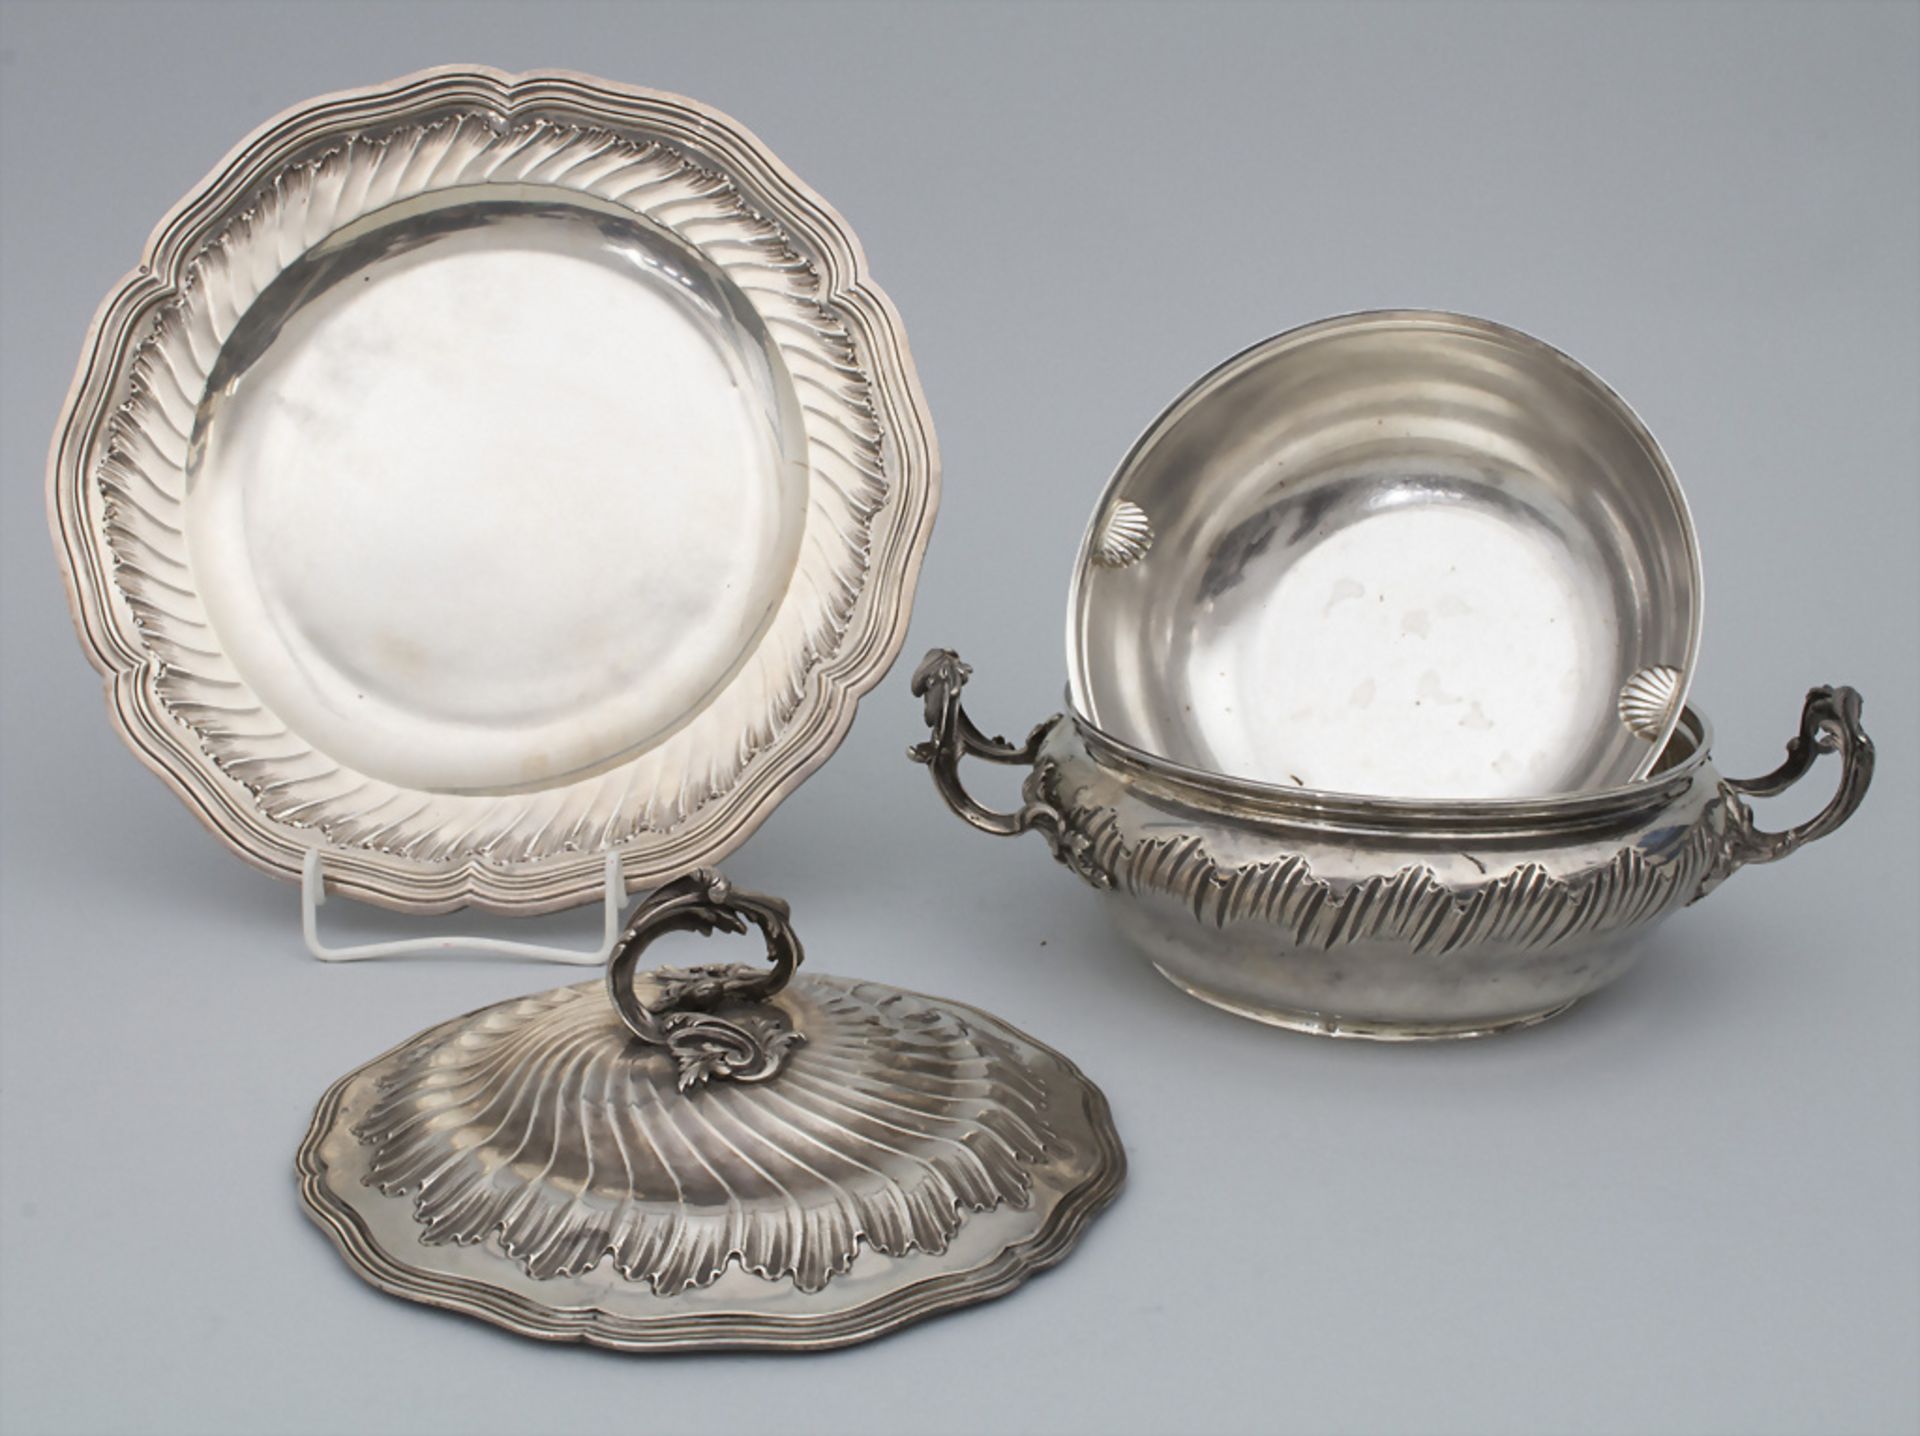 Legumier / Wöchnerinnenschüssel / A silver vegetable tureen with lining and cover, Paris, um 1900 - Image 5 of 13